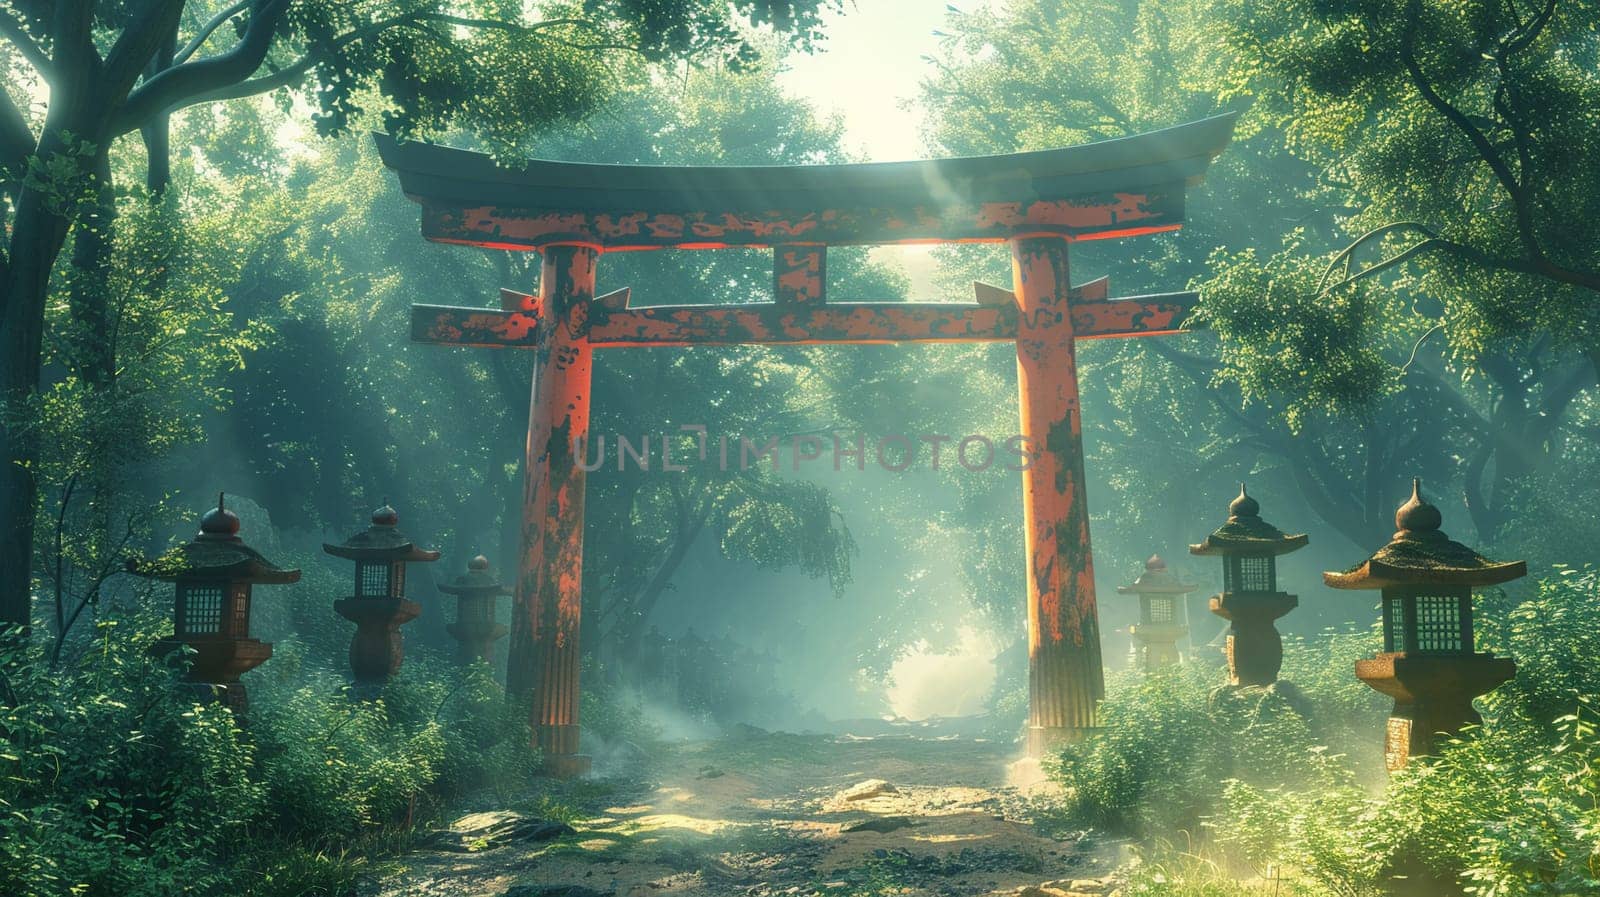 Shinto Shrine Torii Gate Framing a Peaceful Forest The traditional structure blends with nature by Benzoix